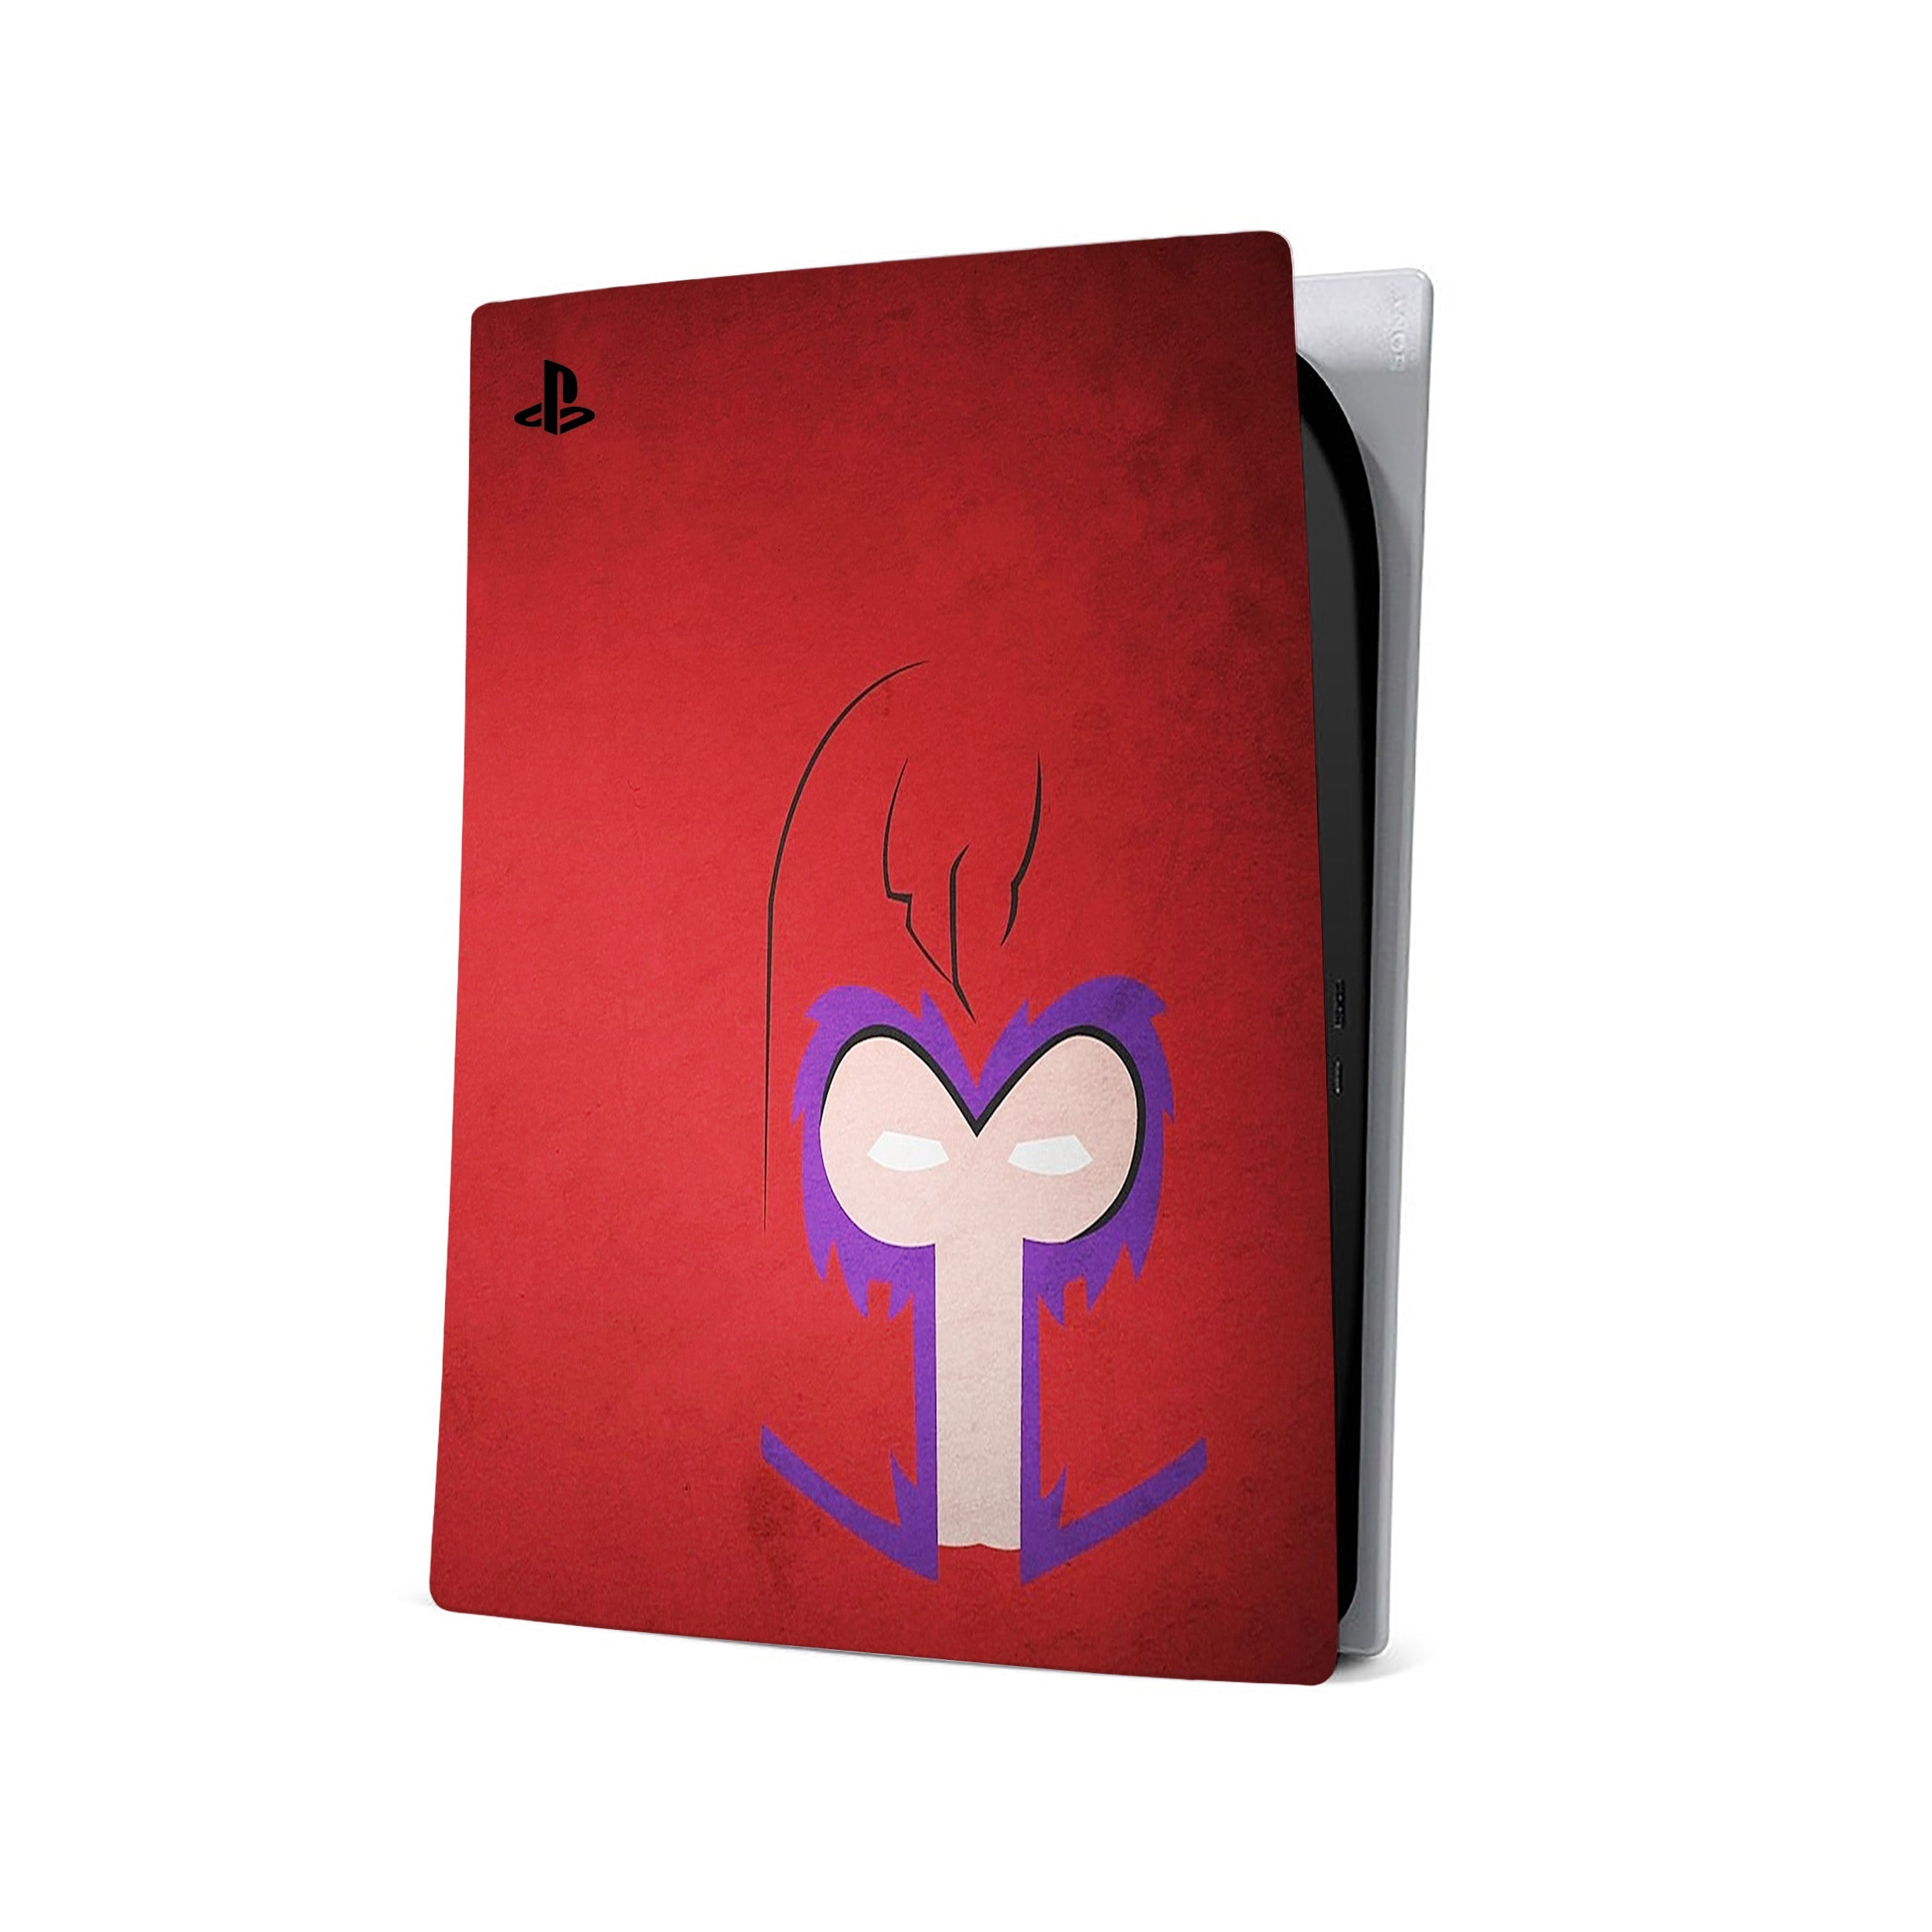 A video game skin featuring a Marvel X Men Magneto design for the PS5.